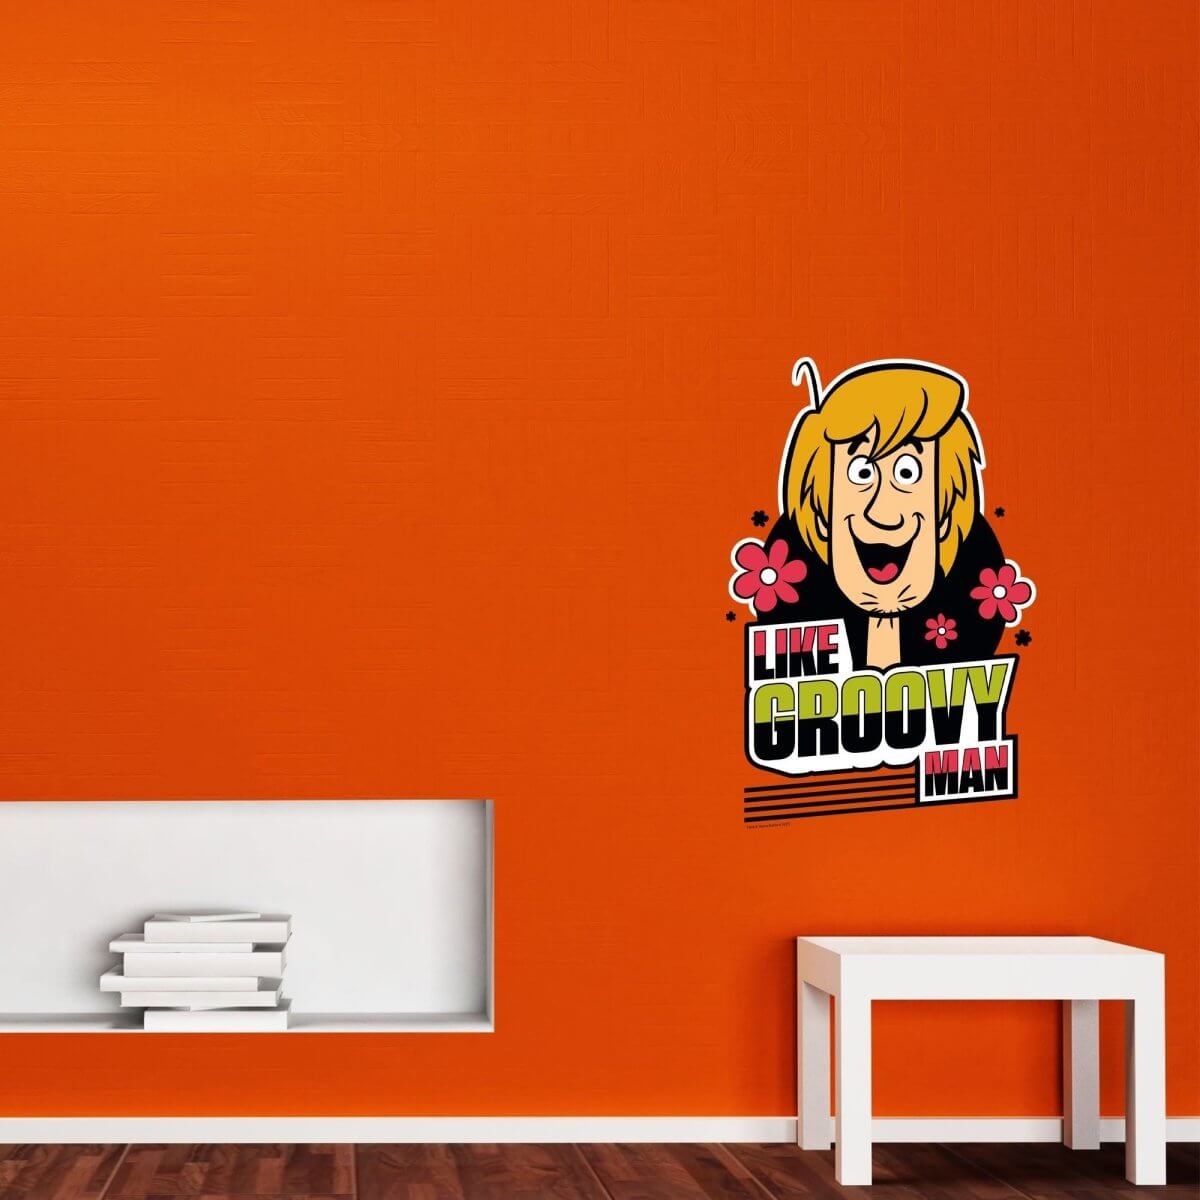 Kismet Decals Home & Room Decor Scooby-Doo Groovy Shaggy Wall decal sticker - officially licensed - latex printed with no solvent odor - Kismet Decals